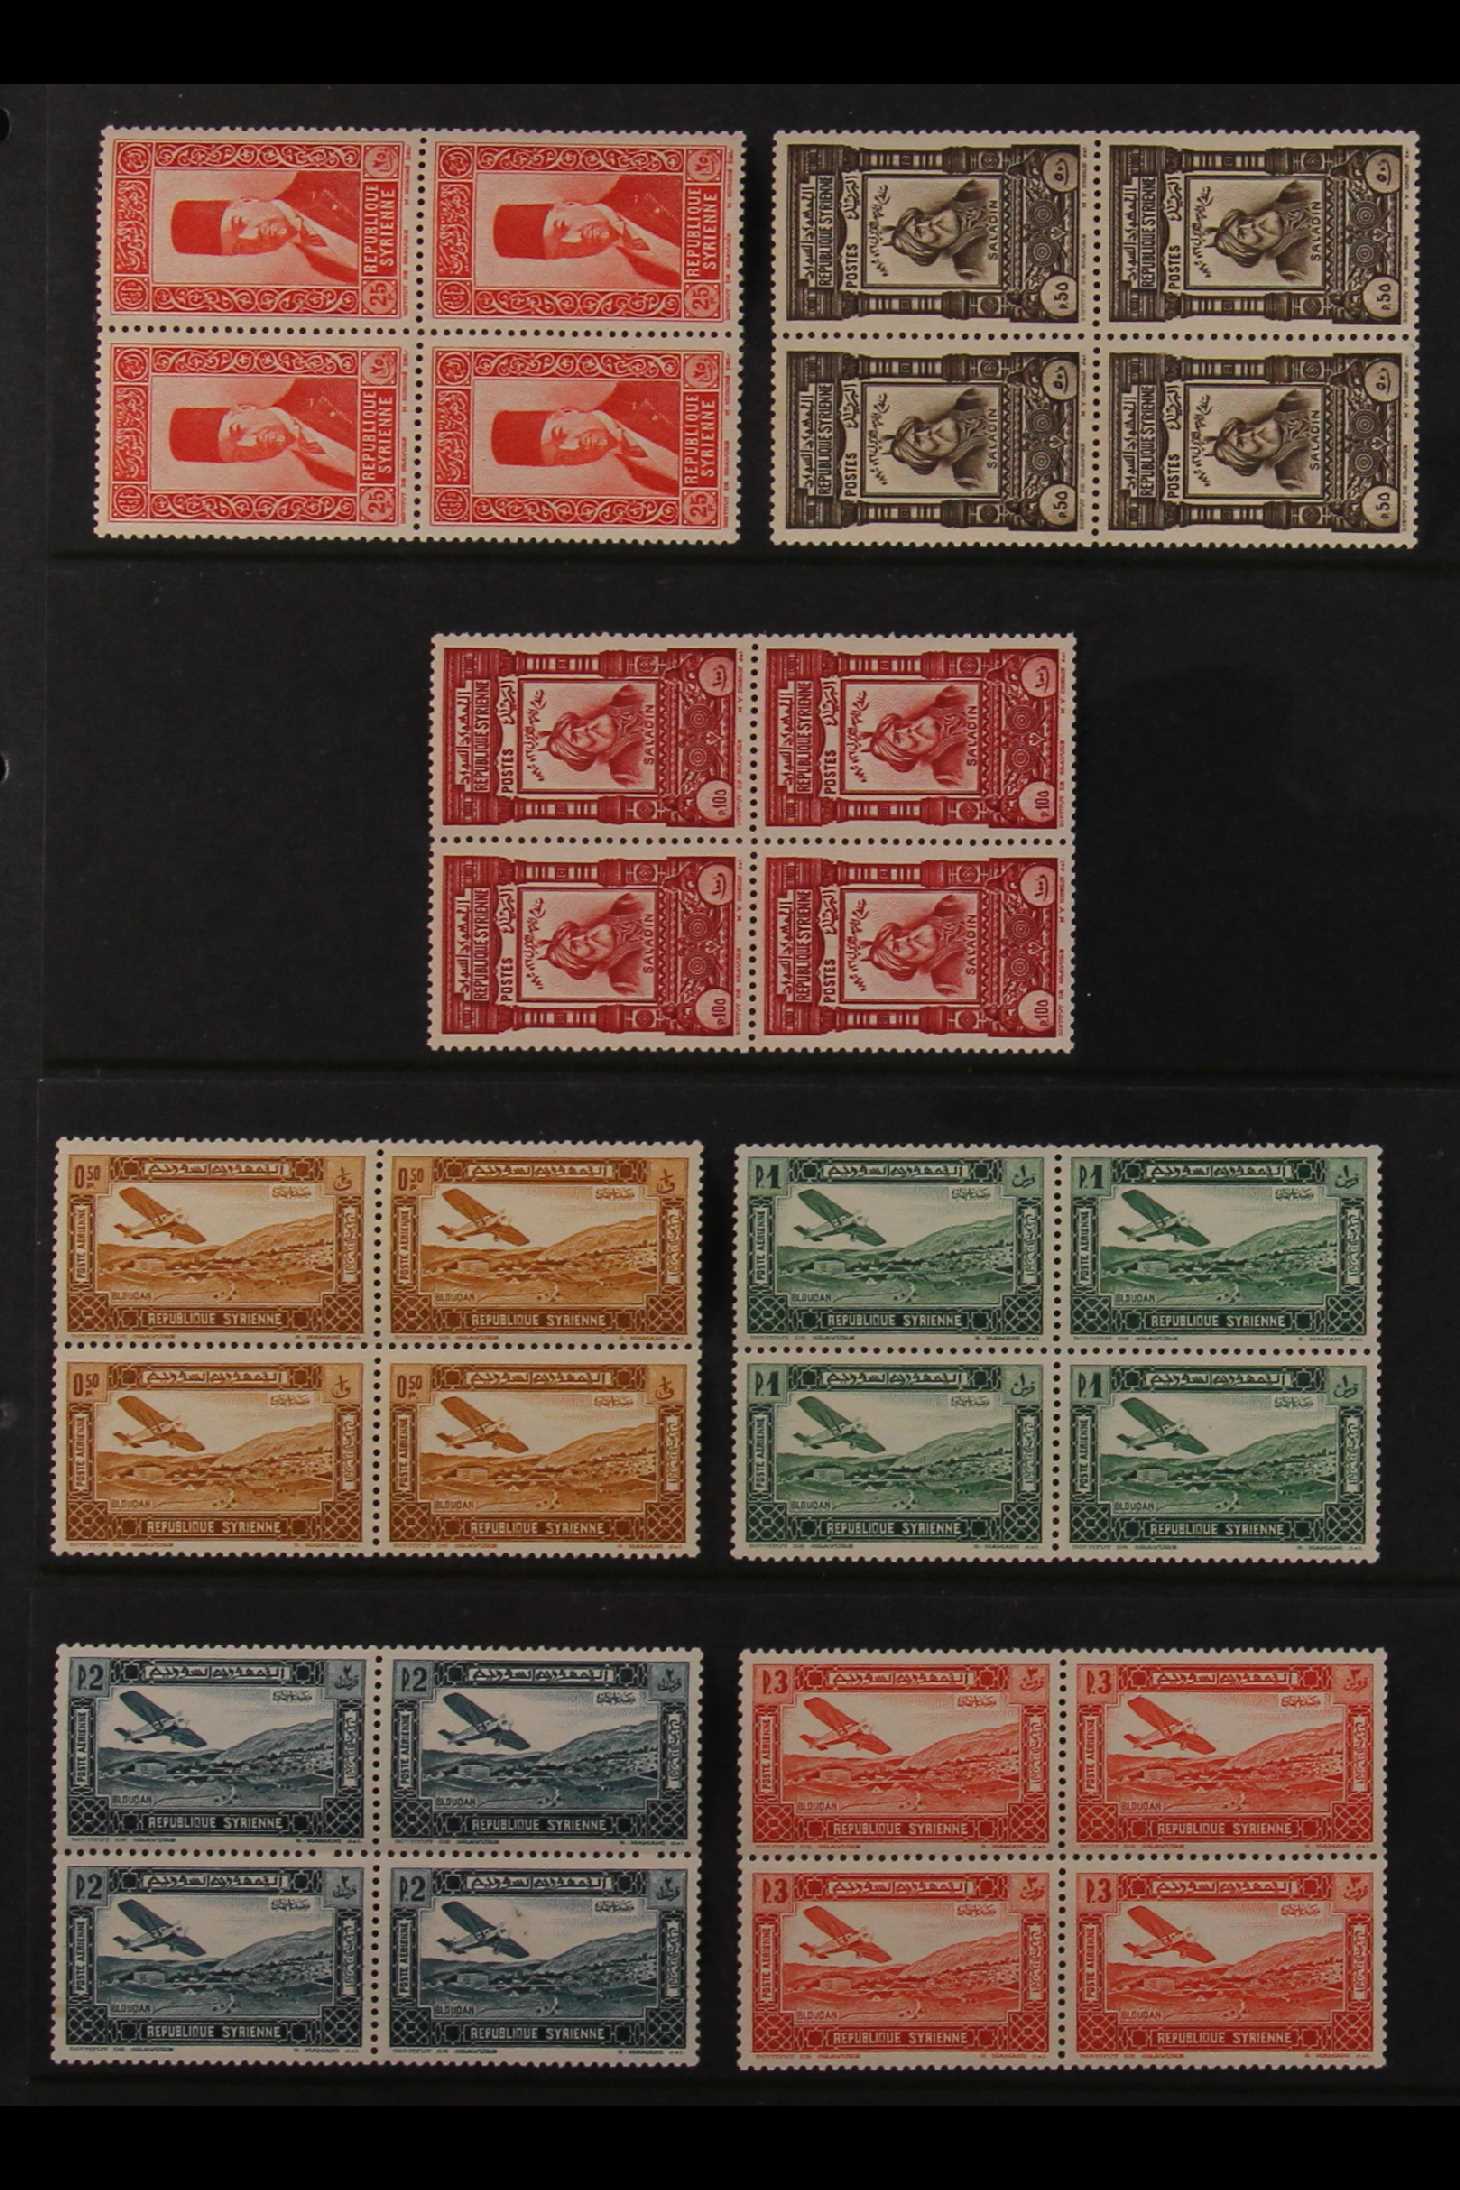 FRENCH COLONIES SYRIA 1934 Establishment of Republic complete set including Airs (SG 271/89 & 290/